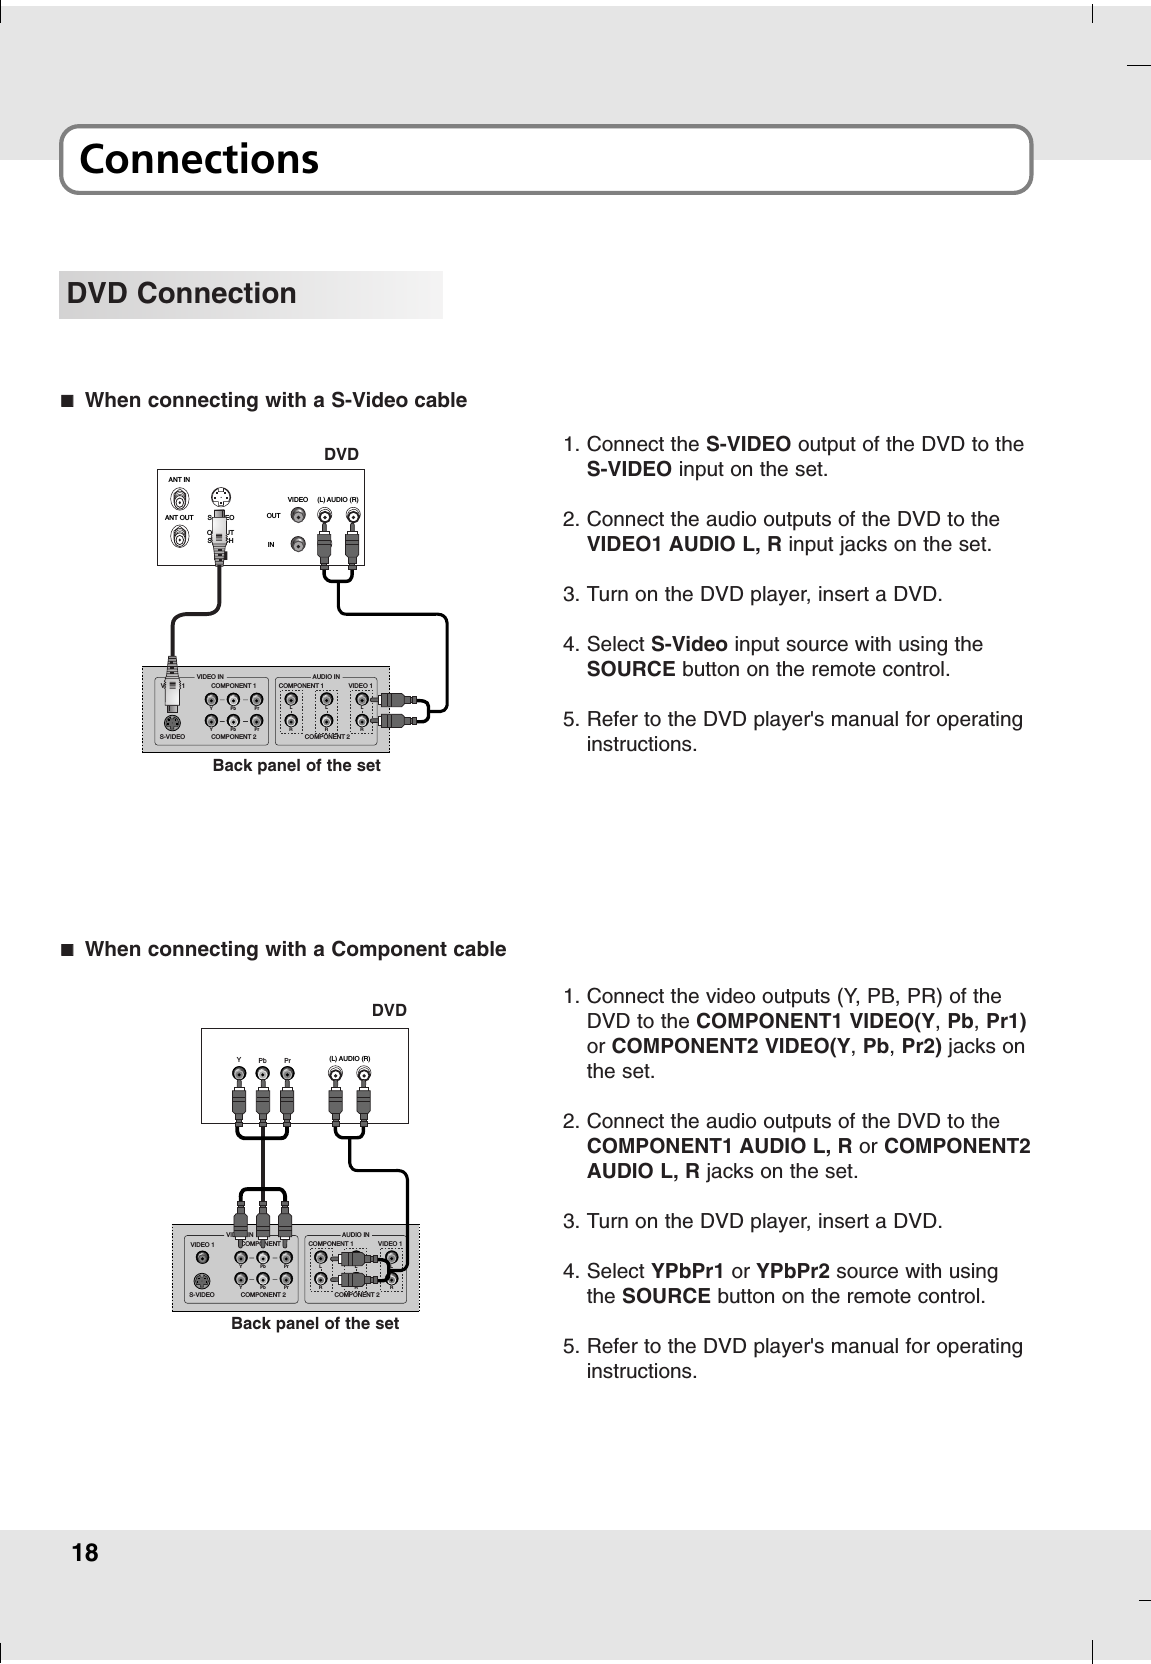 18ConnectionsDVD ConnectionANT INANT OUT S-VIDEOINOUT(L) AUDIO (R)VIDEOOUTPUTSWITCHCOMPONENT 2COMPONENT 1S-VIDEOYPb PrCOMPONENT 2YPb PrVIDEO 1VIDEO INCOMPONENT 1 VIDEO 1AUDIO INLRLRLR1. Connect the S-VIDEO output of the DVD to theS-VIDEO input on the set.2. Connect the audio outputs of the DVD to theVIDEO1 AUDIO L, R input jacks on the set.3. Turn on the DVD player, insert a DVD.4. Select S-Video input source with using theSOURCE button on the remote control.5. Refer to the DVD player&apos;s manual for operatinginstructions.AAWhen connecting with a S-Video cableCOMPONENT 2COMPONENT 1S-VIDEOYPb PrCOMPONENT 2YPb PrVIDEO 1VIDEO INCOMPONENT 1 VIDEO 1AUDIO INLRLRLR(L) AUDIO (R)YPb Pr1. Connect the video outputs (Y, PB, PR) of theDVD to the COMPONENT1 VIDEO(Y,Pb,Pr1)or COMPONENT2 VIDEO(Y,Pb,Pr2) jacks onthe set.2. Connect the audio outputs of the DVD to theCOMPONENT1 AUDIO L, R or COMPONENT2AUDIO L, R jacks on the set.3. Turn on the DVD player, insert a DVD.4. Select YPbPr1 or YPbPr2 source with usingthe SOURCE button on the remote control.5. Refer to the DVD player&apos;s manual for operatinginstructions.AAWhen connecting with a Component cableDVDBack panel of the setDVDBack panel of the set